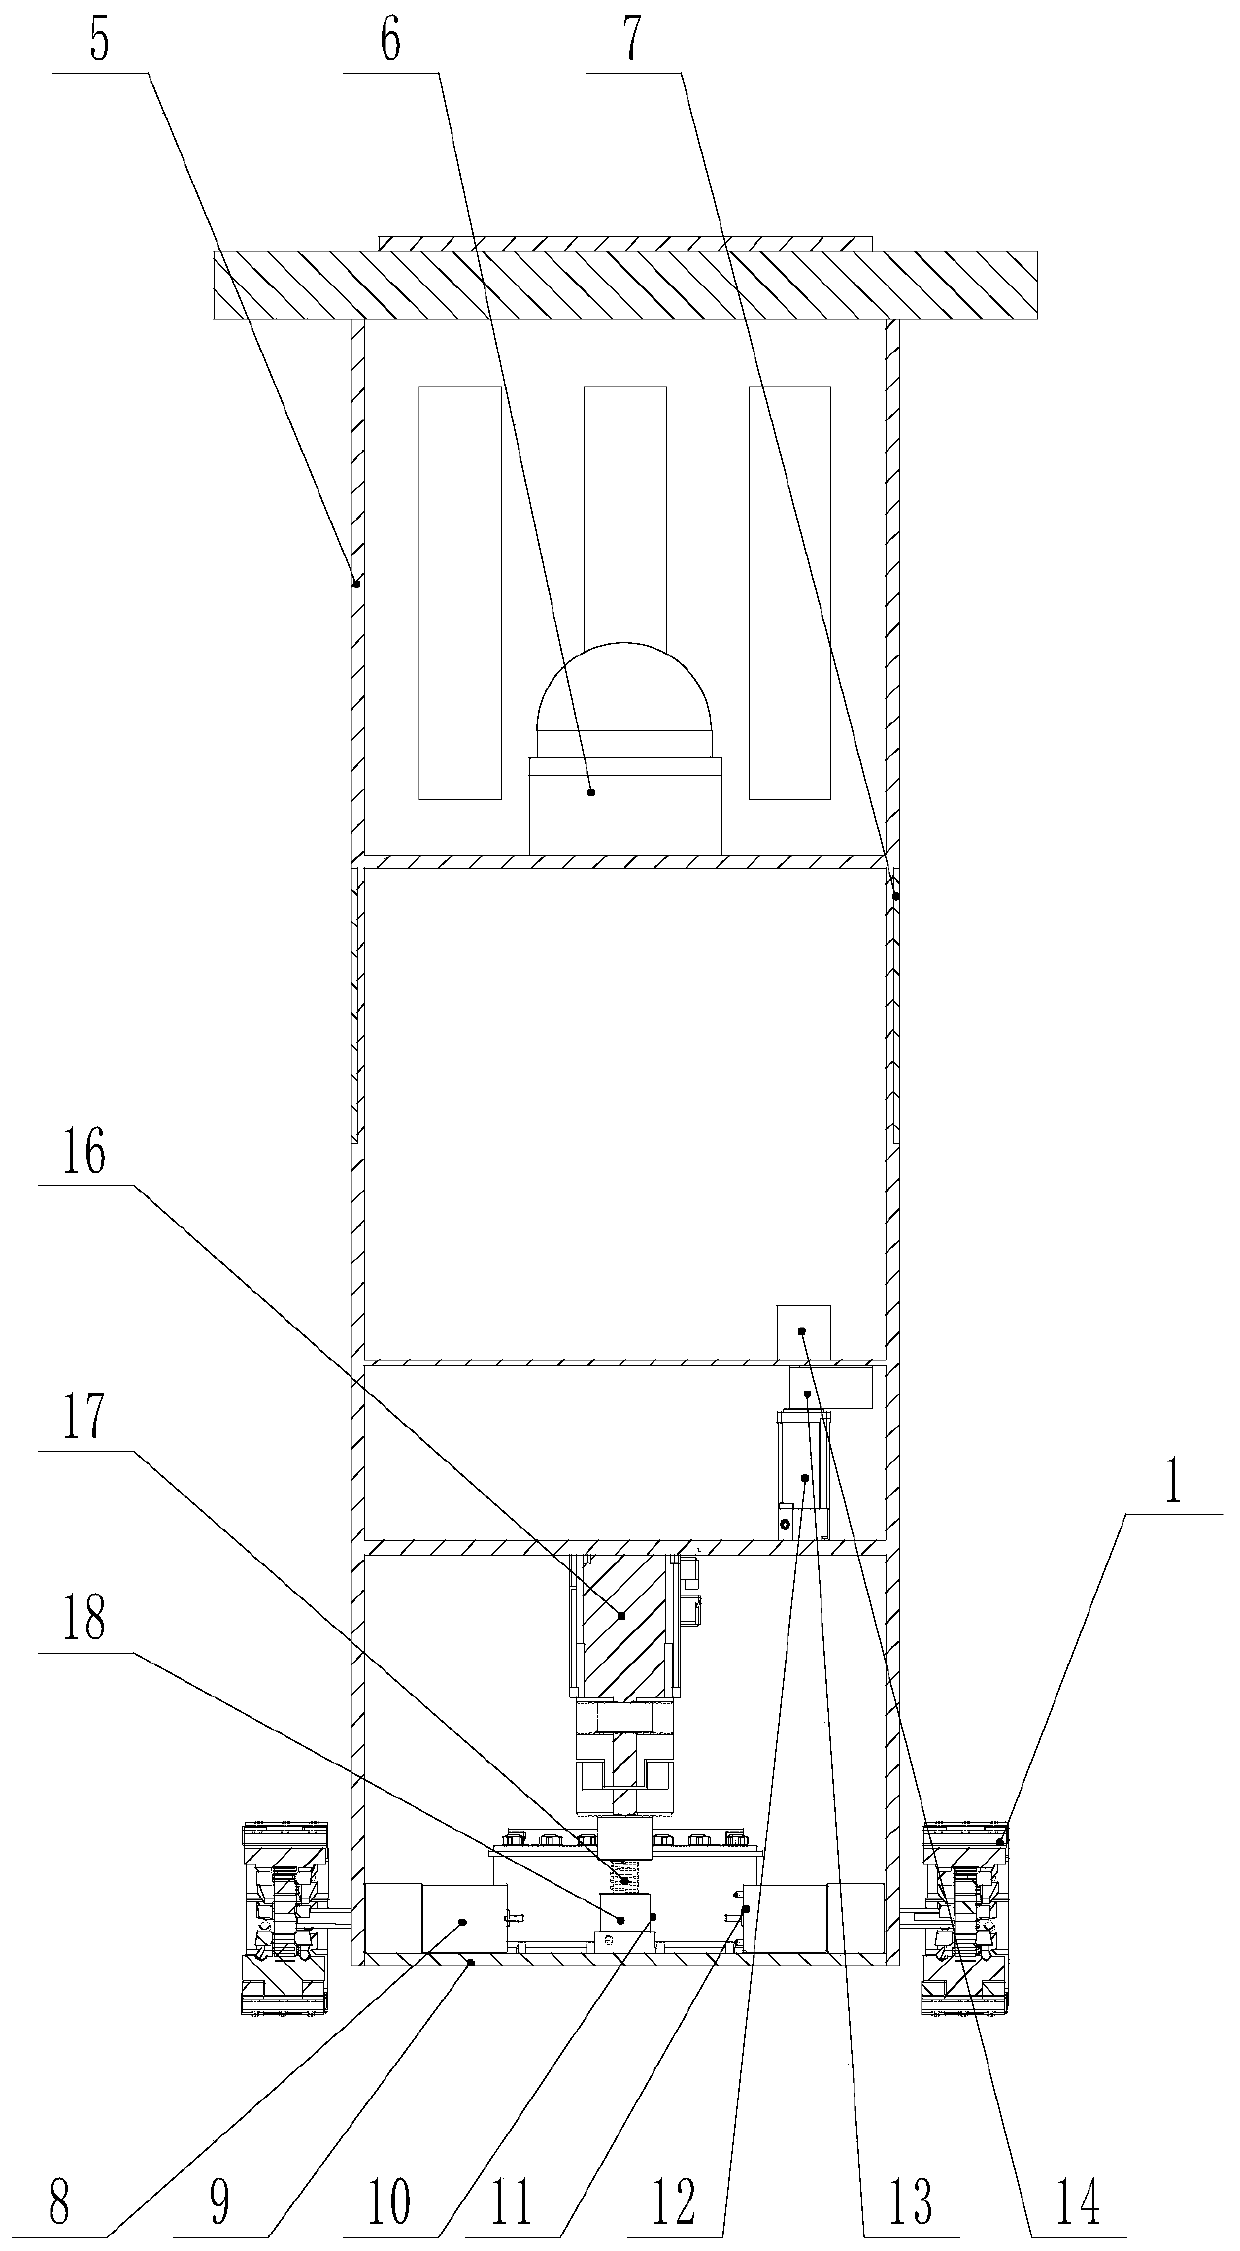 A tidal lane change system and method based on laser ranging and obstacle avoidance